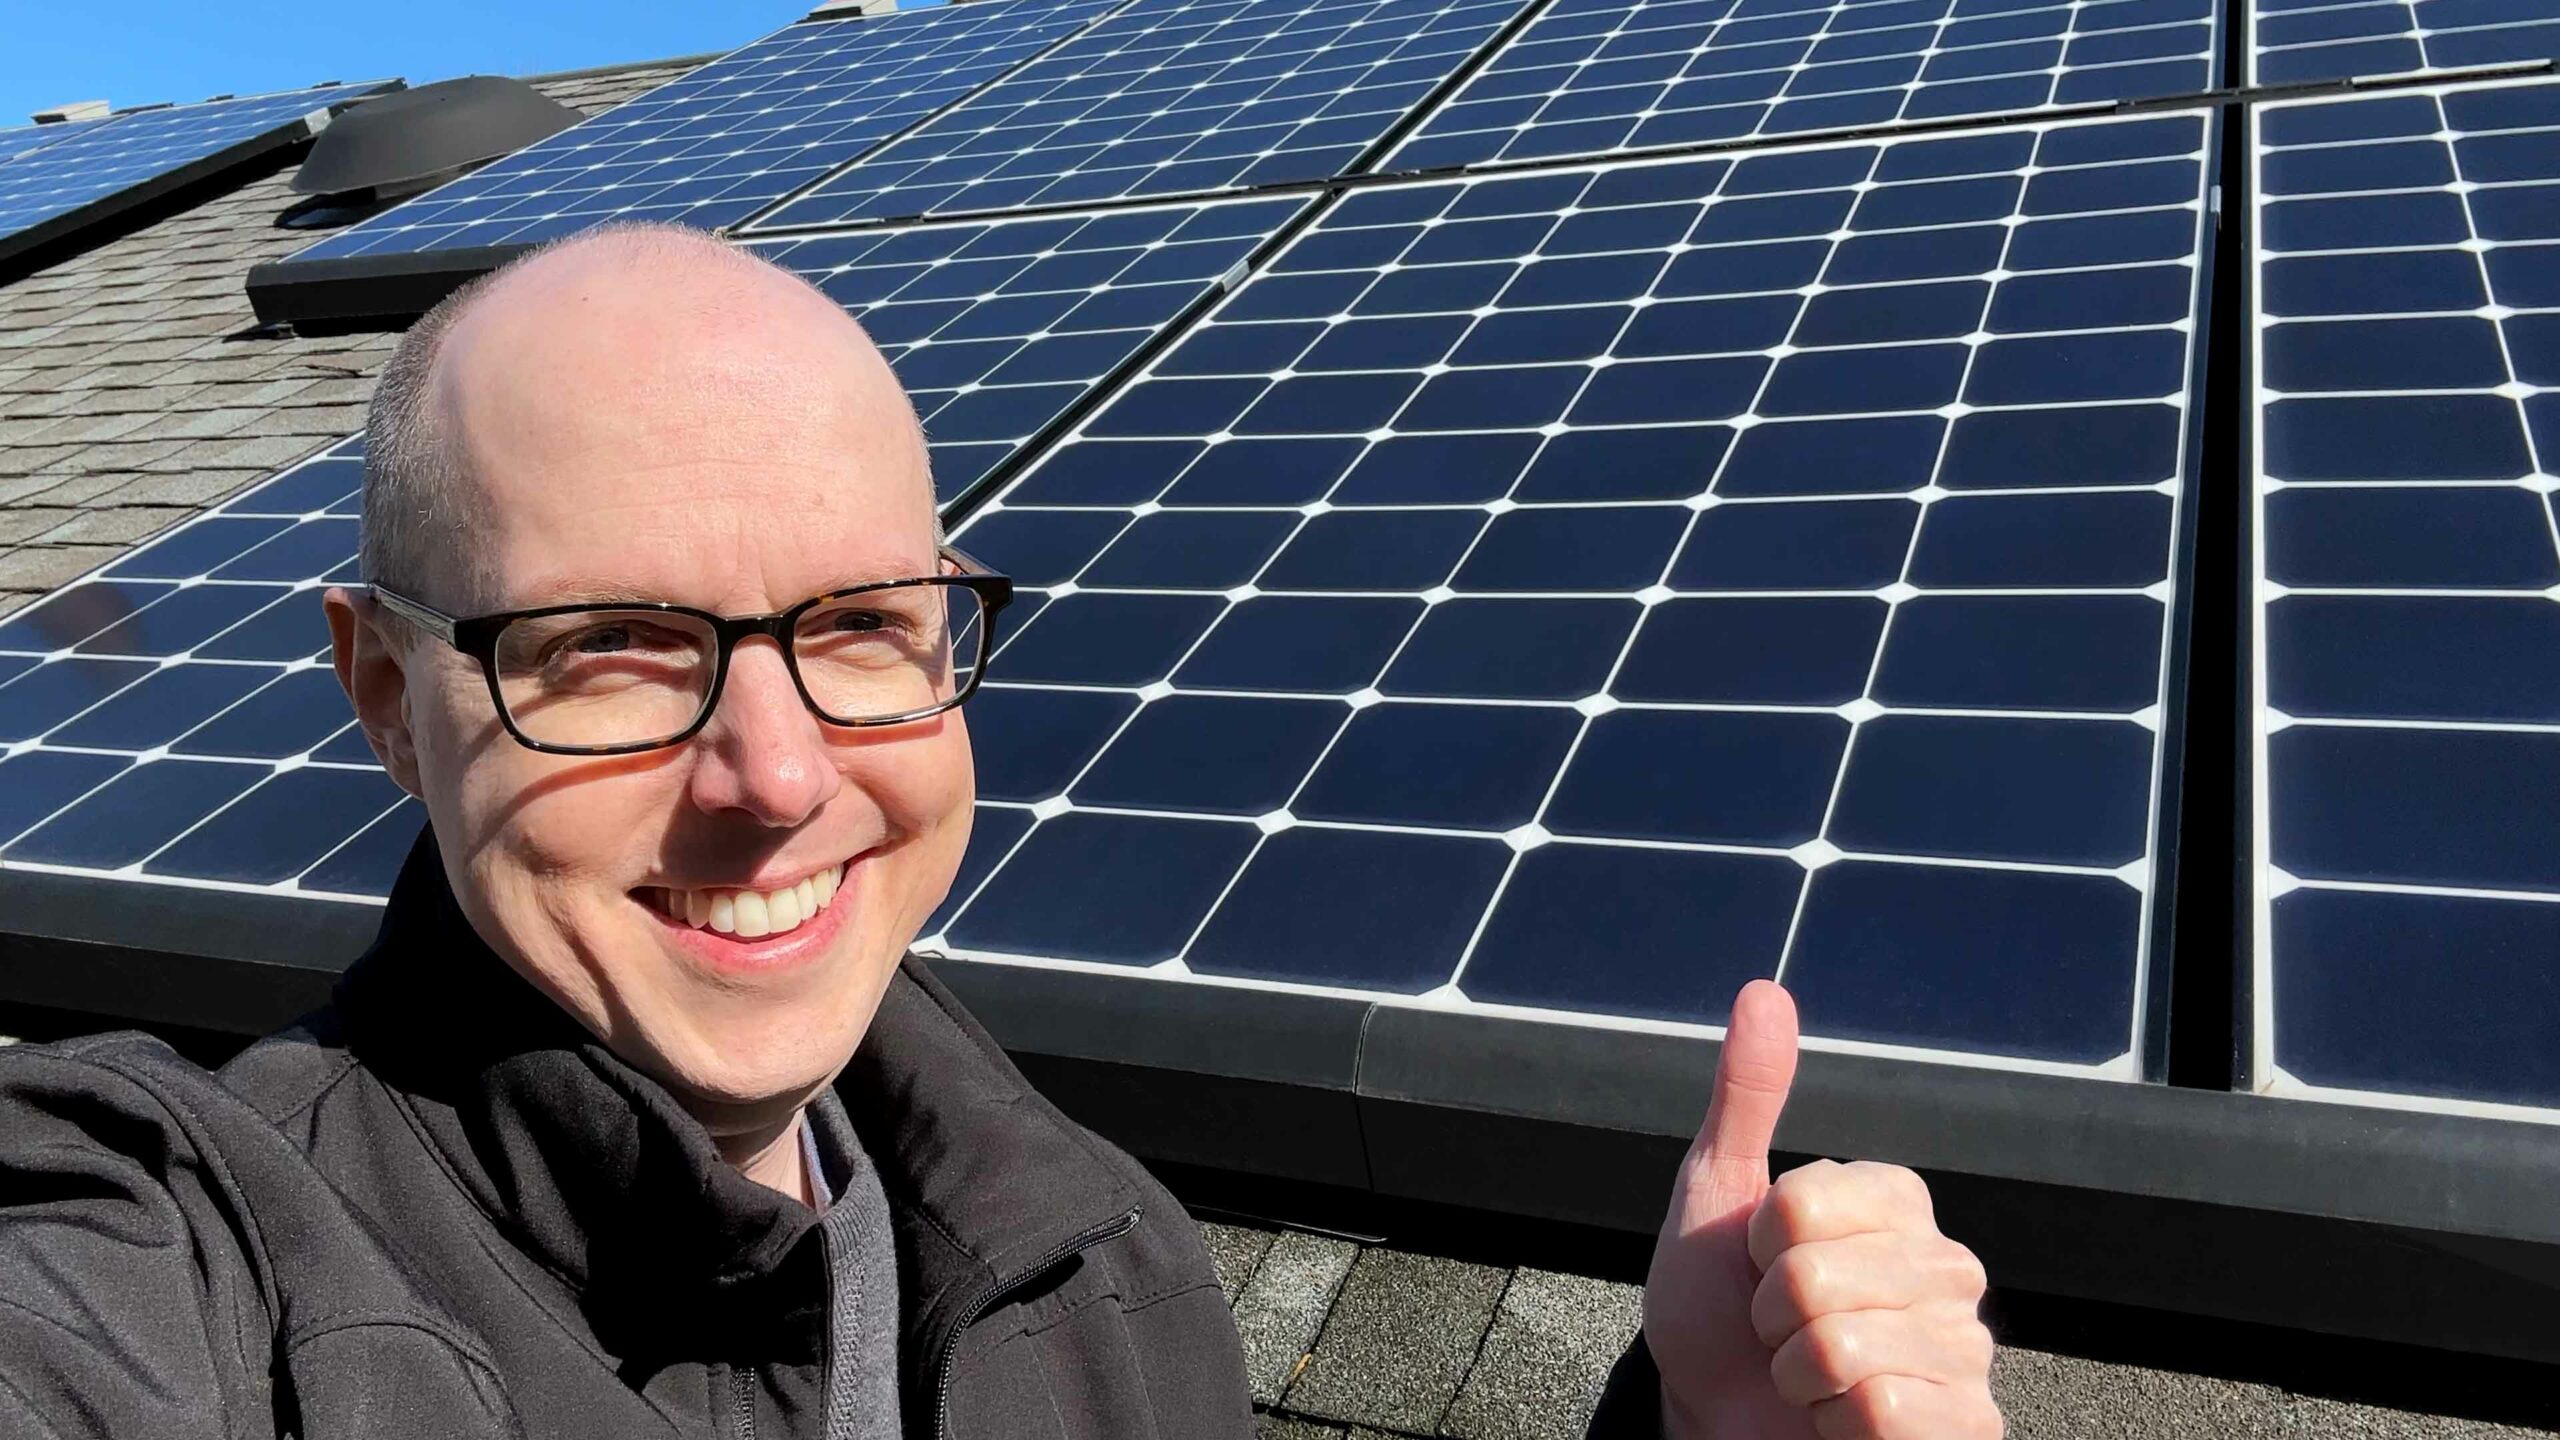 Have we been doing Solar wrong all along? - Undecided with Matt Ferrell